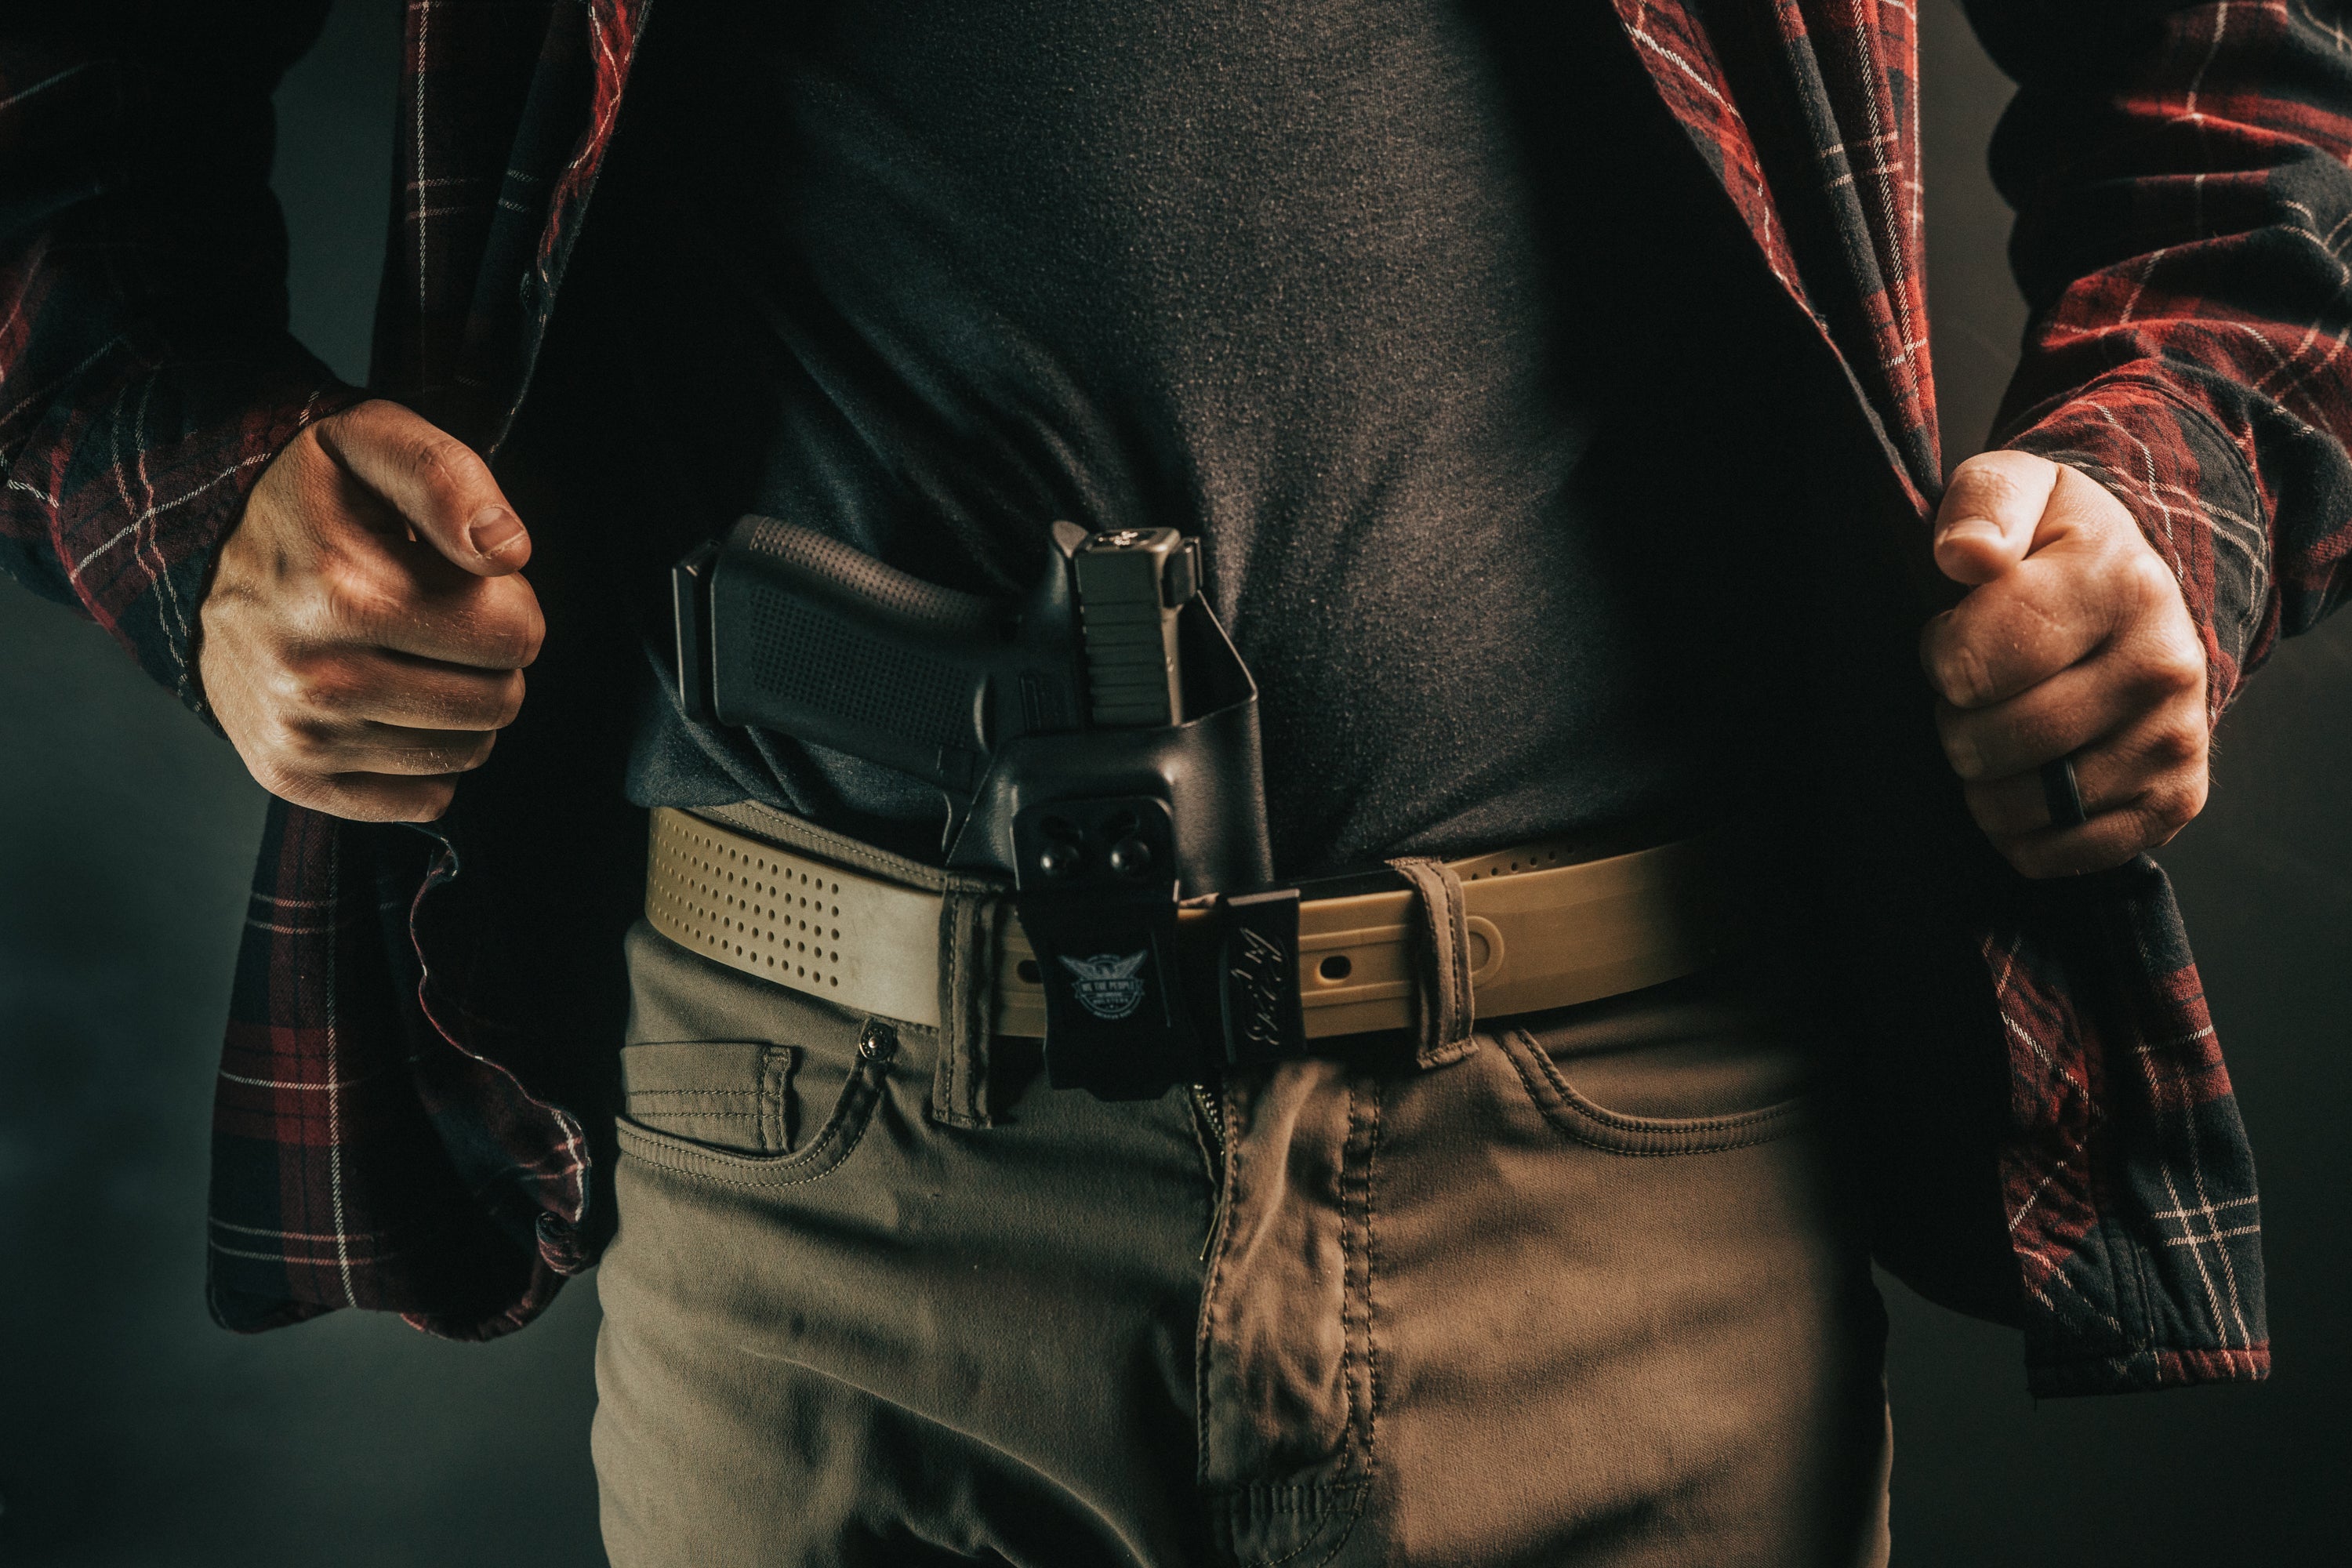 Appendix carry belt  by Ridge Belts. Tactical belt buckle for the outdoors. Simple mens belt buckle for conceal carry. EDC belt for all sizes. Lightweight mountain hiking belt. Tactical conceal carry belt for every day carry. Military grade belt for men. Tactical conceal carry belt.